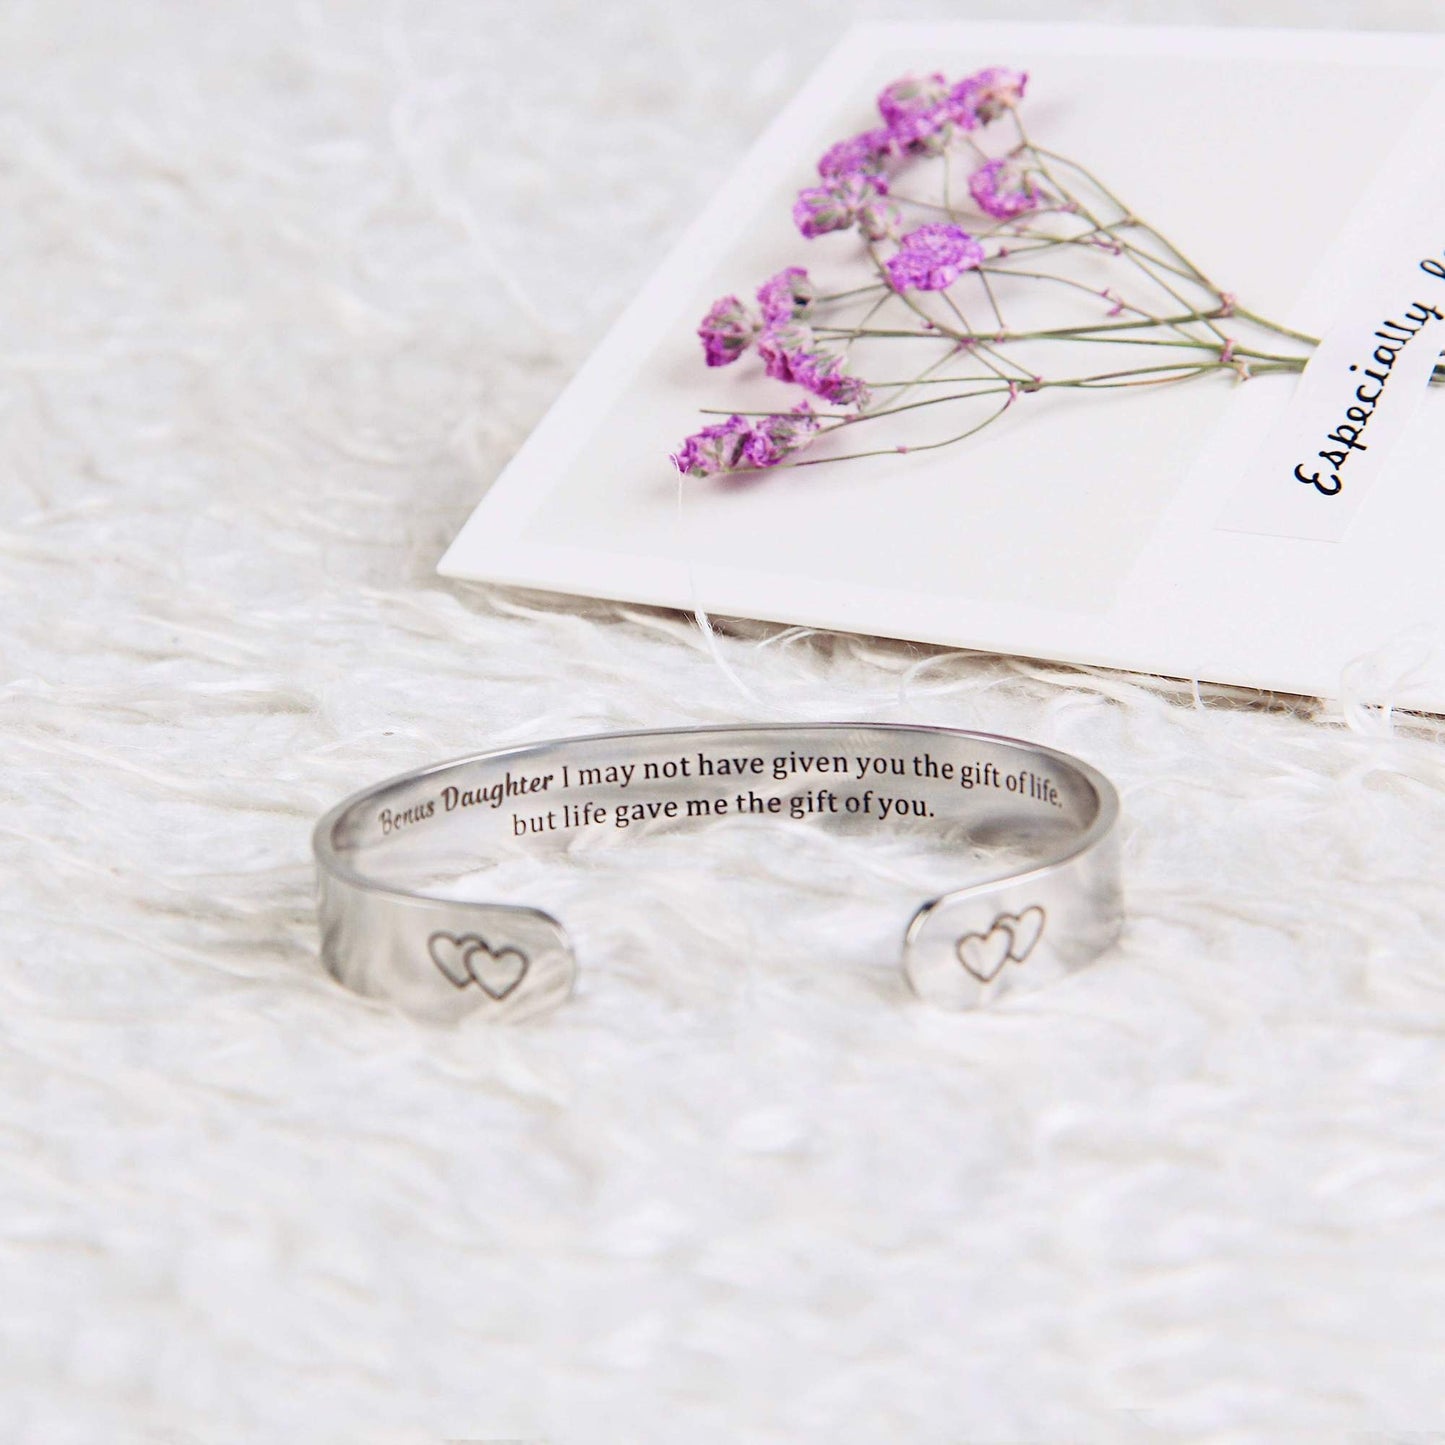 [CUSTOM NAME] To My Bonus Daughter "BONUS DAUGHTER, I MAY NOT HAVE GIVEN YOU THE GIFT OF LIFE. BUT LIFE GAVE ME THE GIFT OF YOU" Bracelet - SARAH'S WHISPER